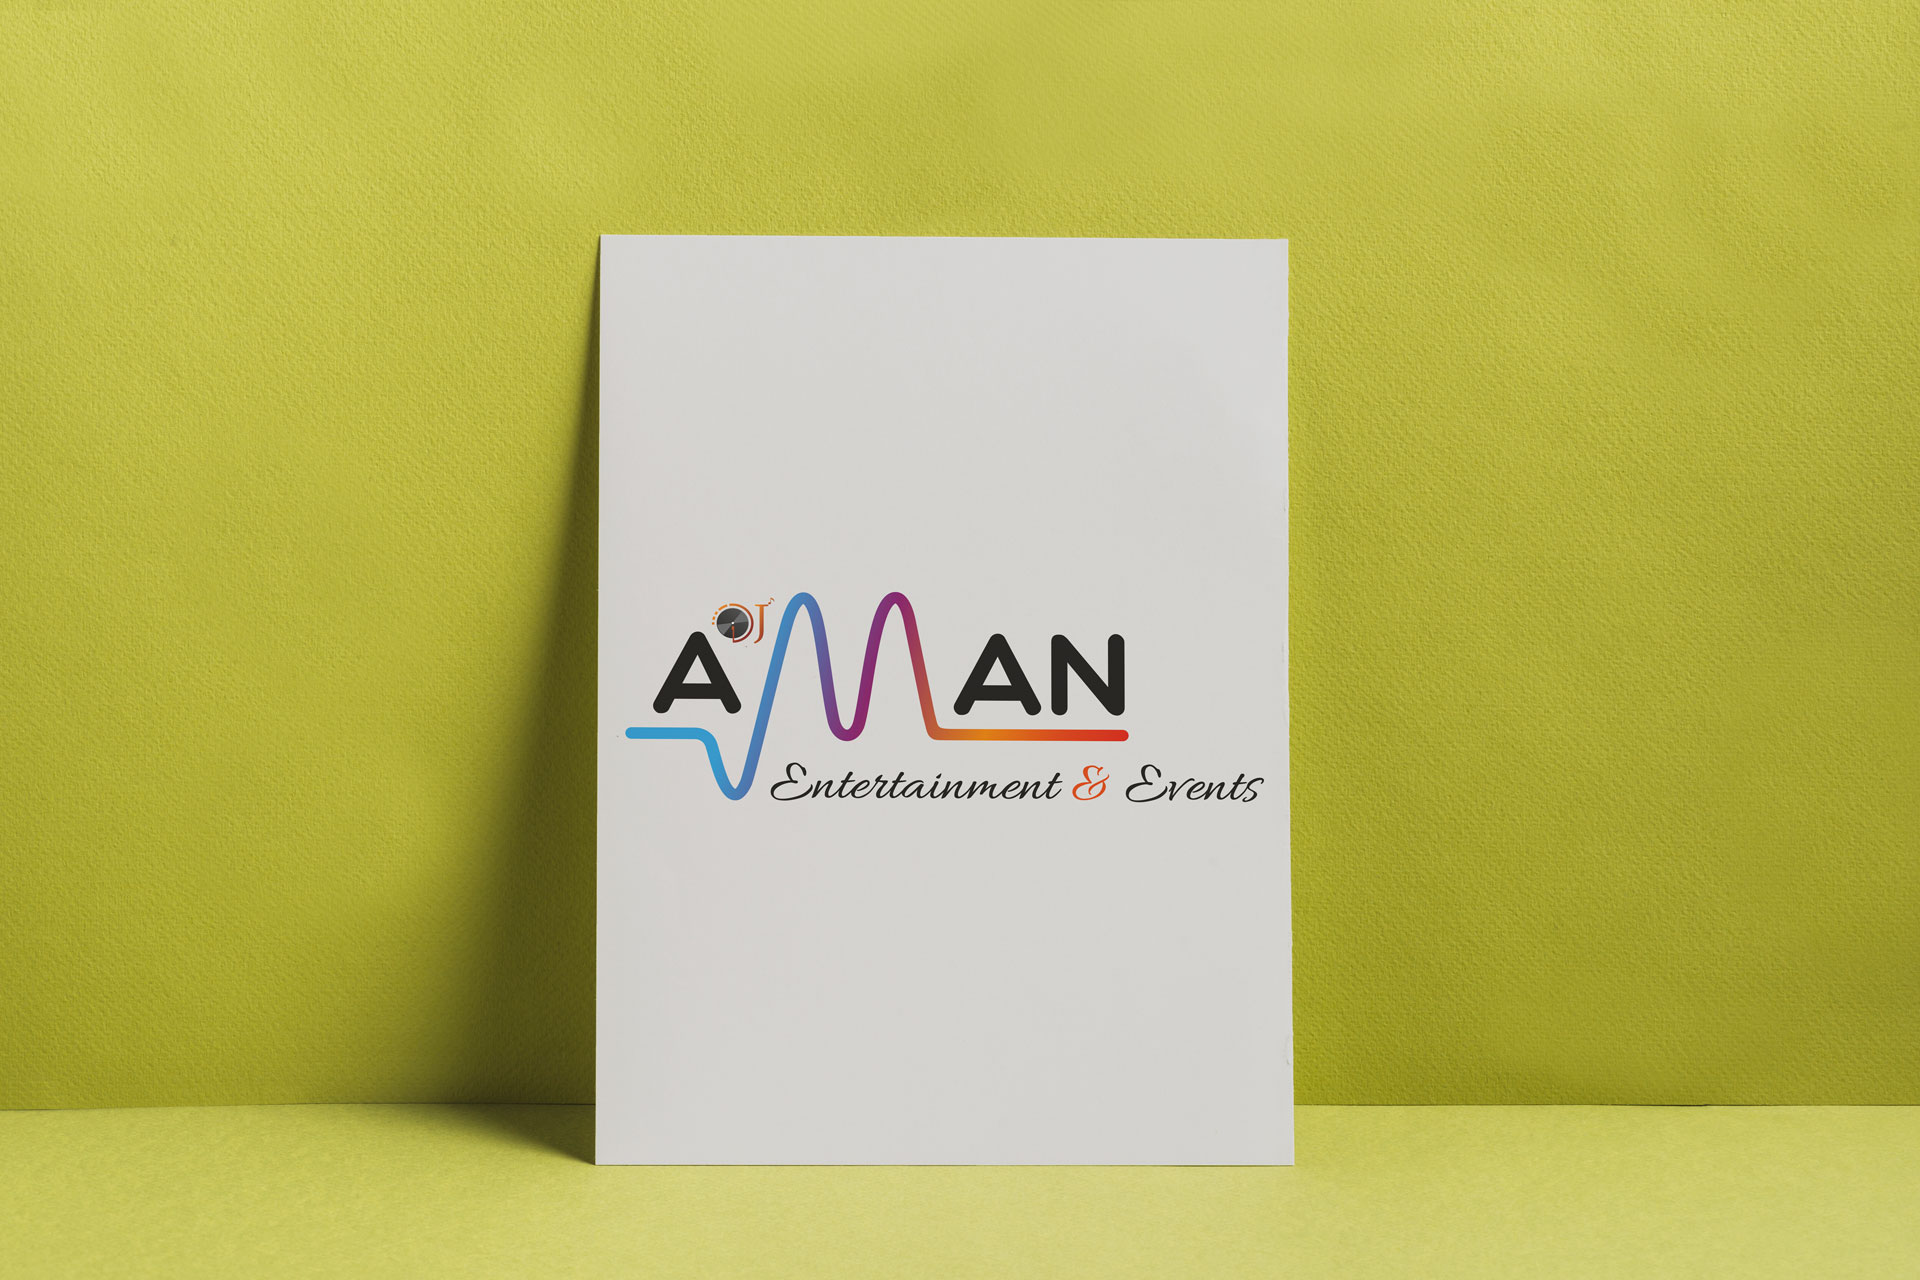 DJ Aman is a very talented DJ and very passionate about his work.